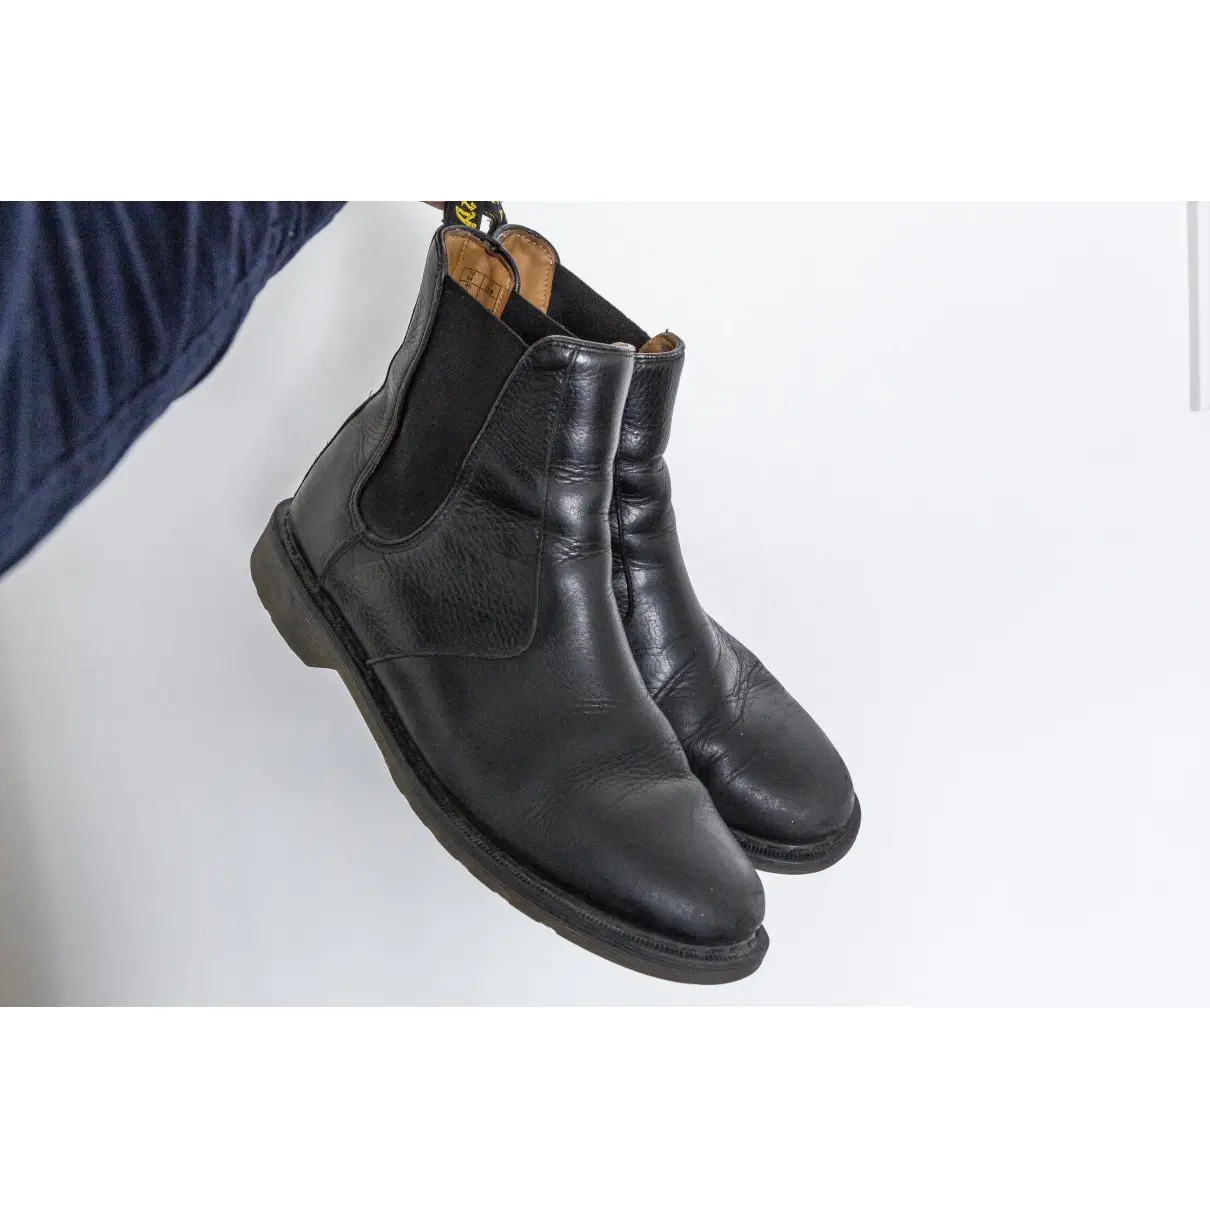 Buy Dr. Martens Chelsea leather boots online